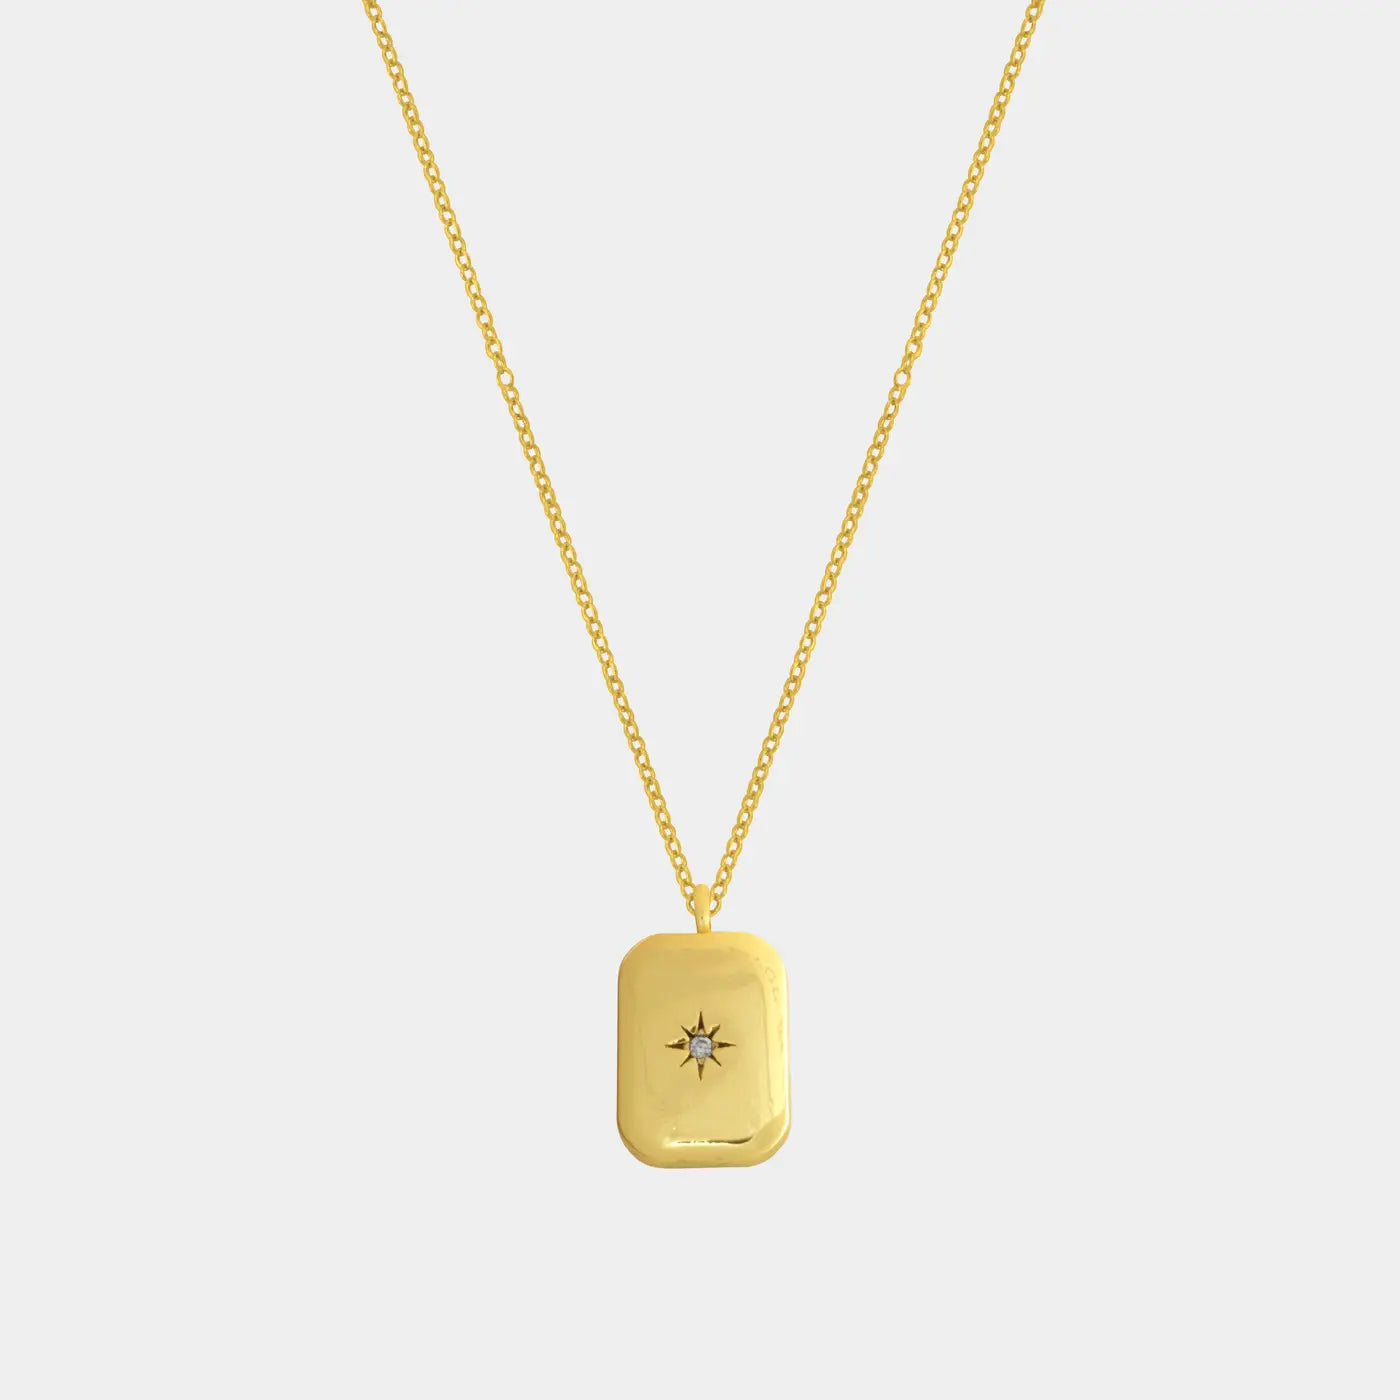 siizu, gold pendant necklace, star, sirius star necklace, womens jewelry, gold jewelry, star necklace, ethical and sustainably made, curate